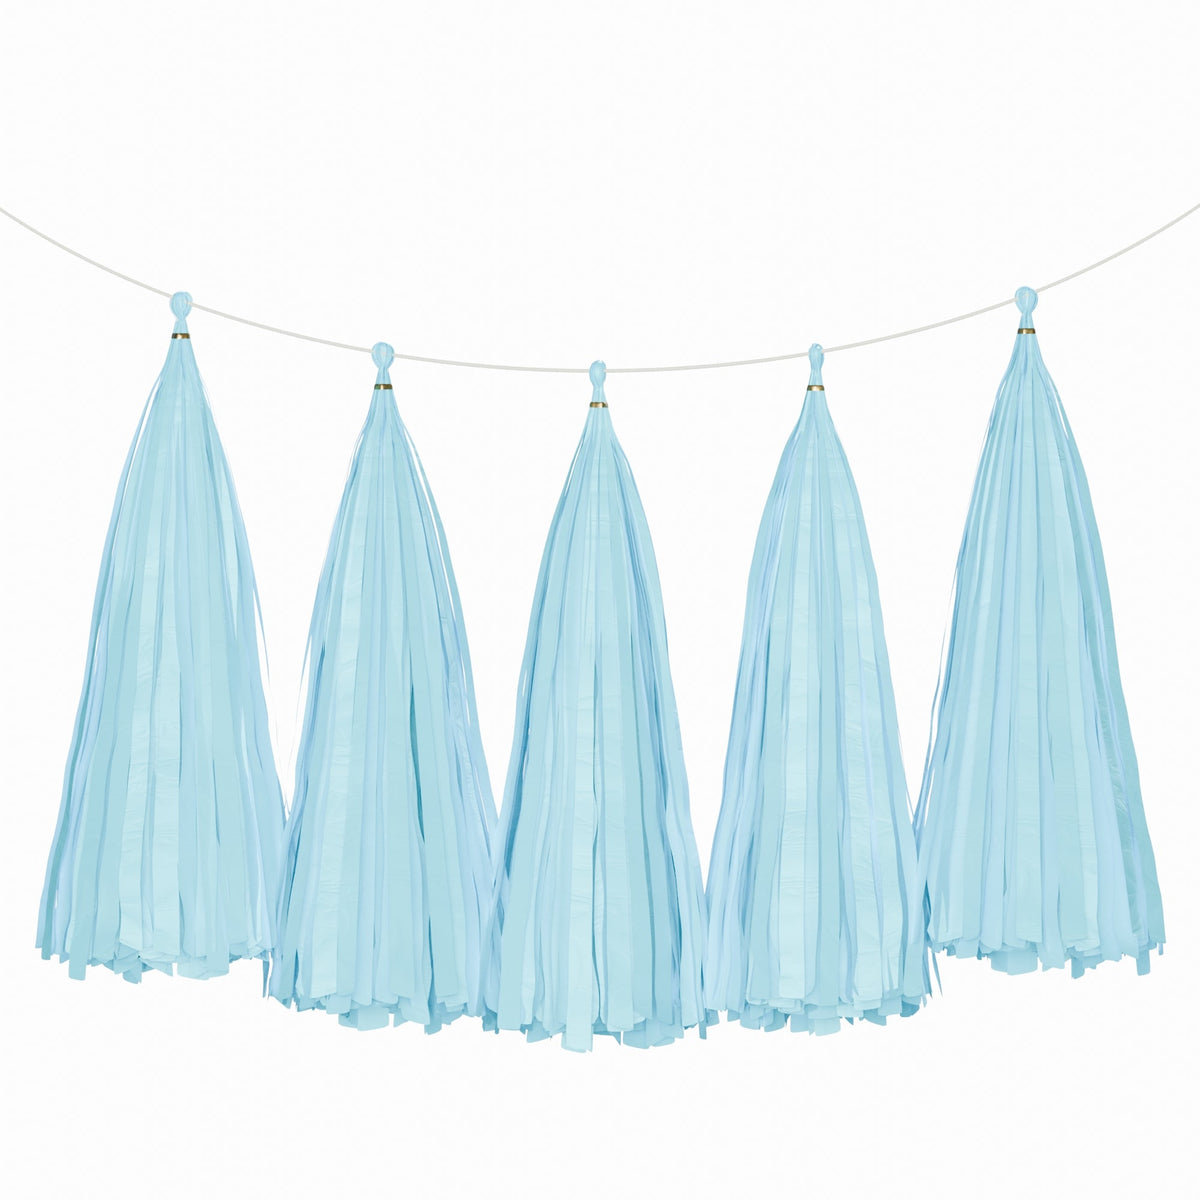 Weifang Mayshine Imp&exp co Decorations Light Blue Tassel Garland, 5 Count 810064197123